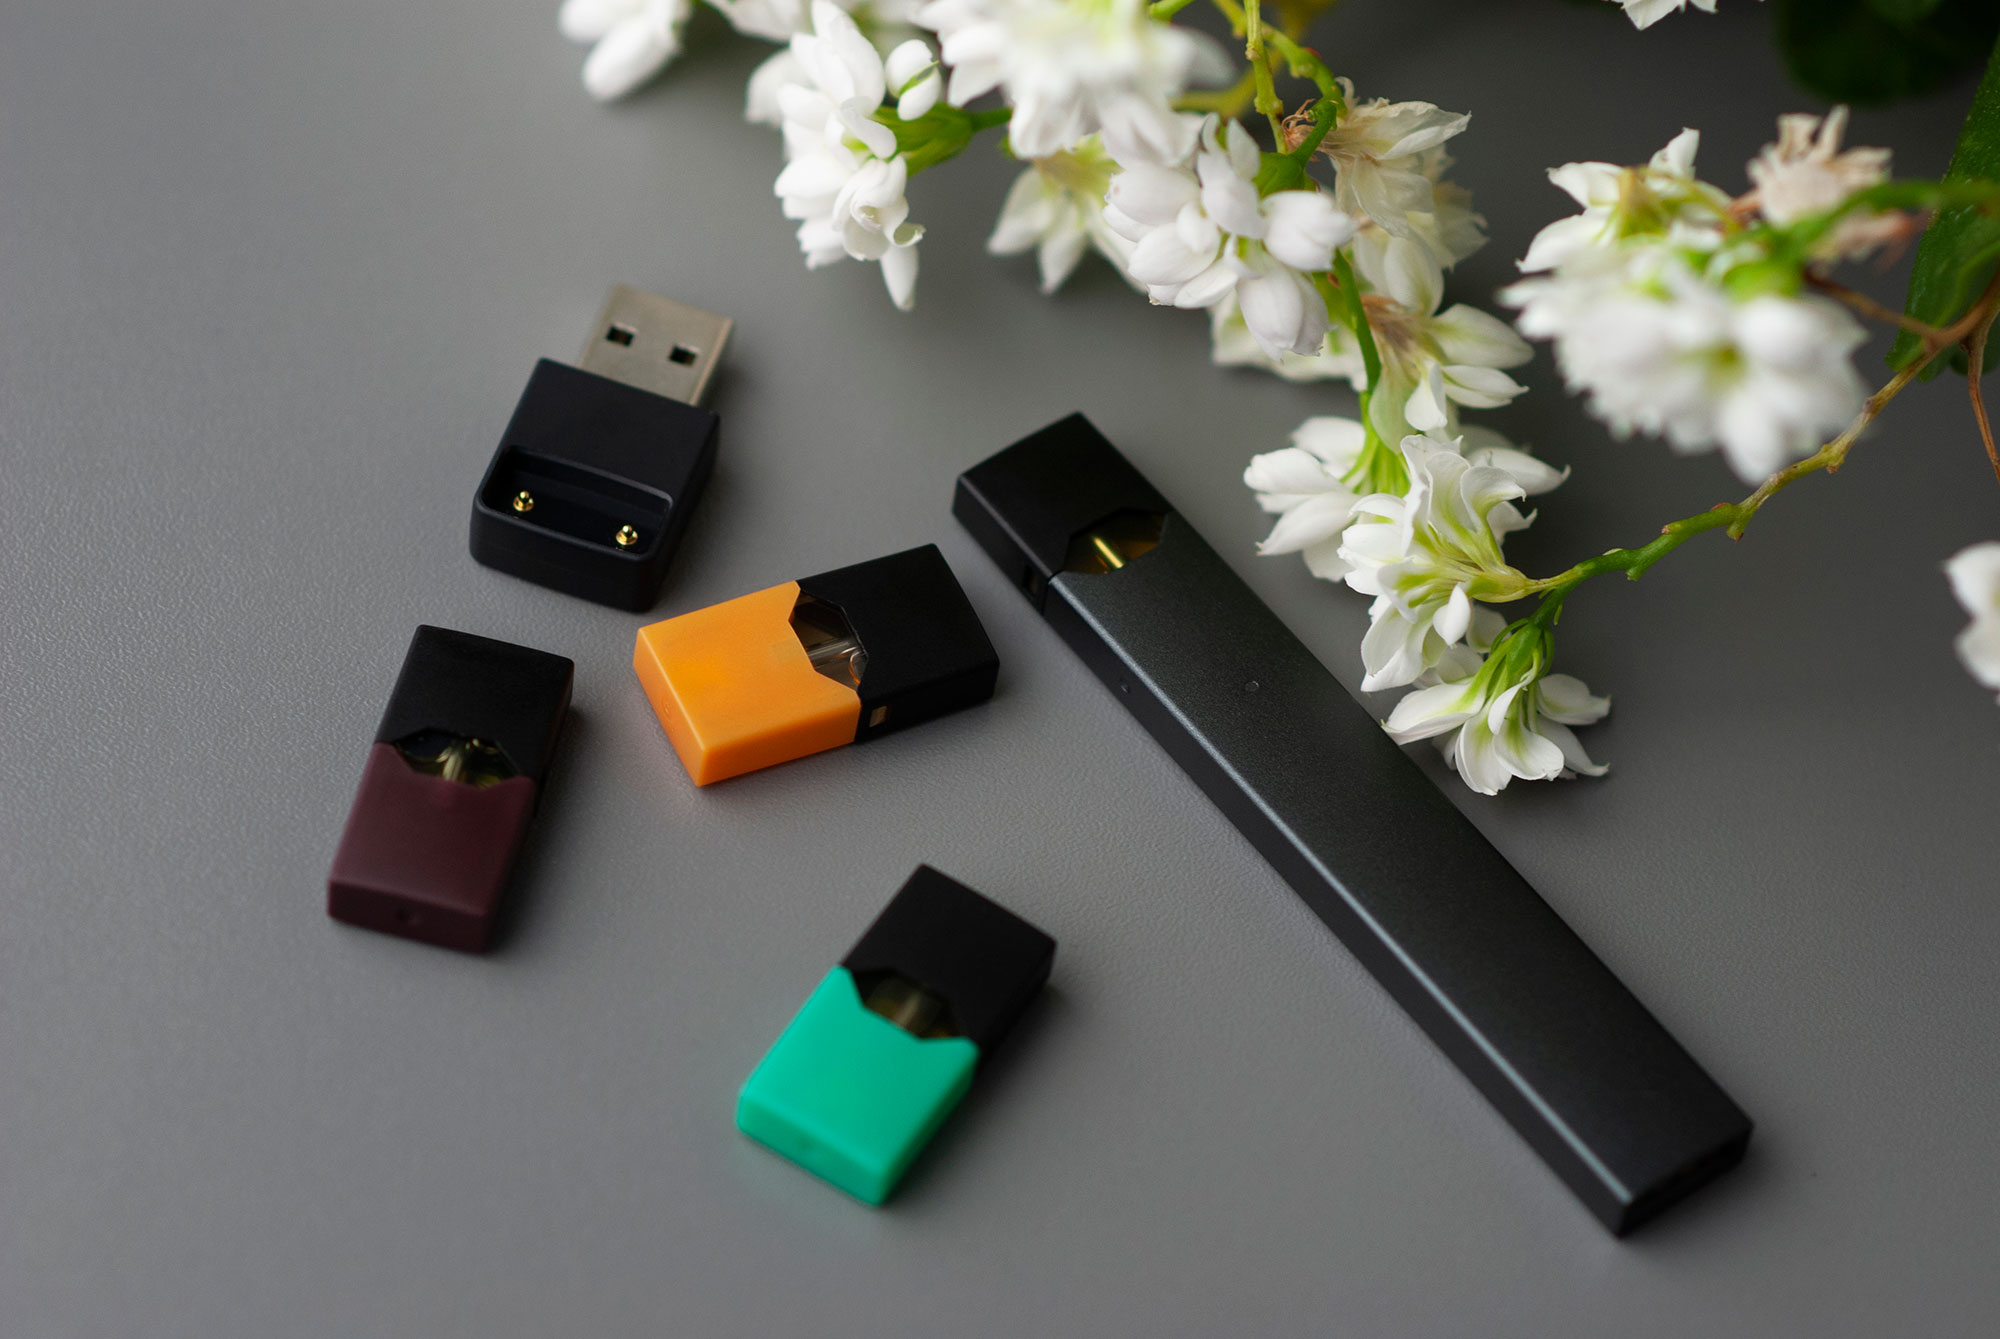 juul and flavor pods